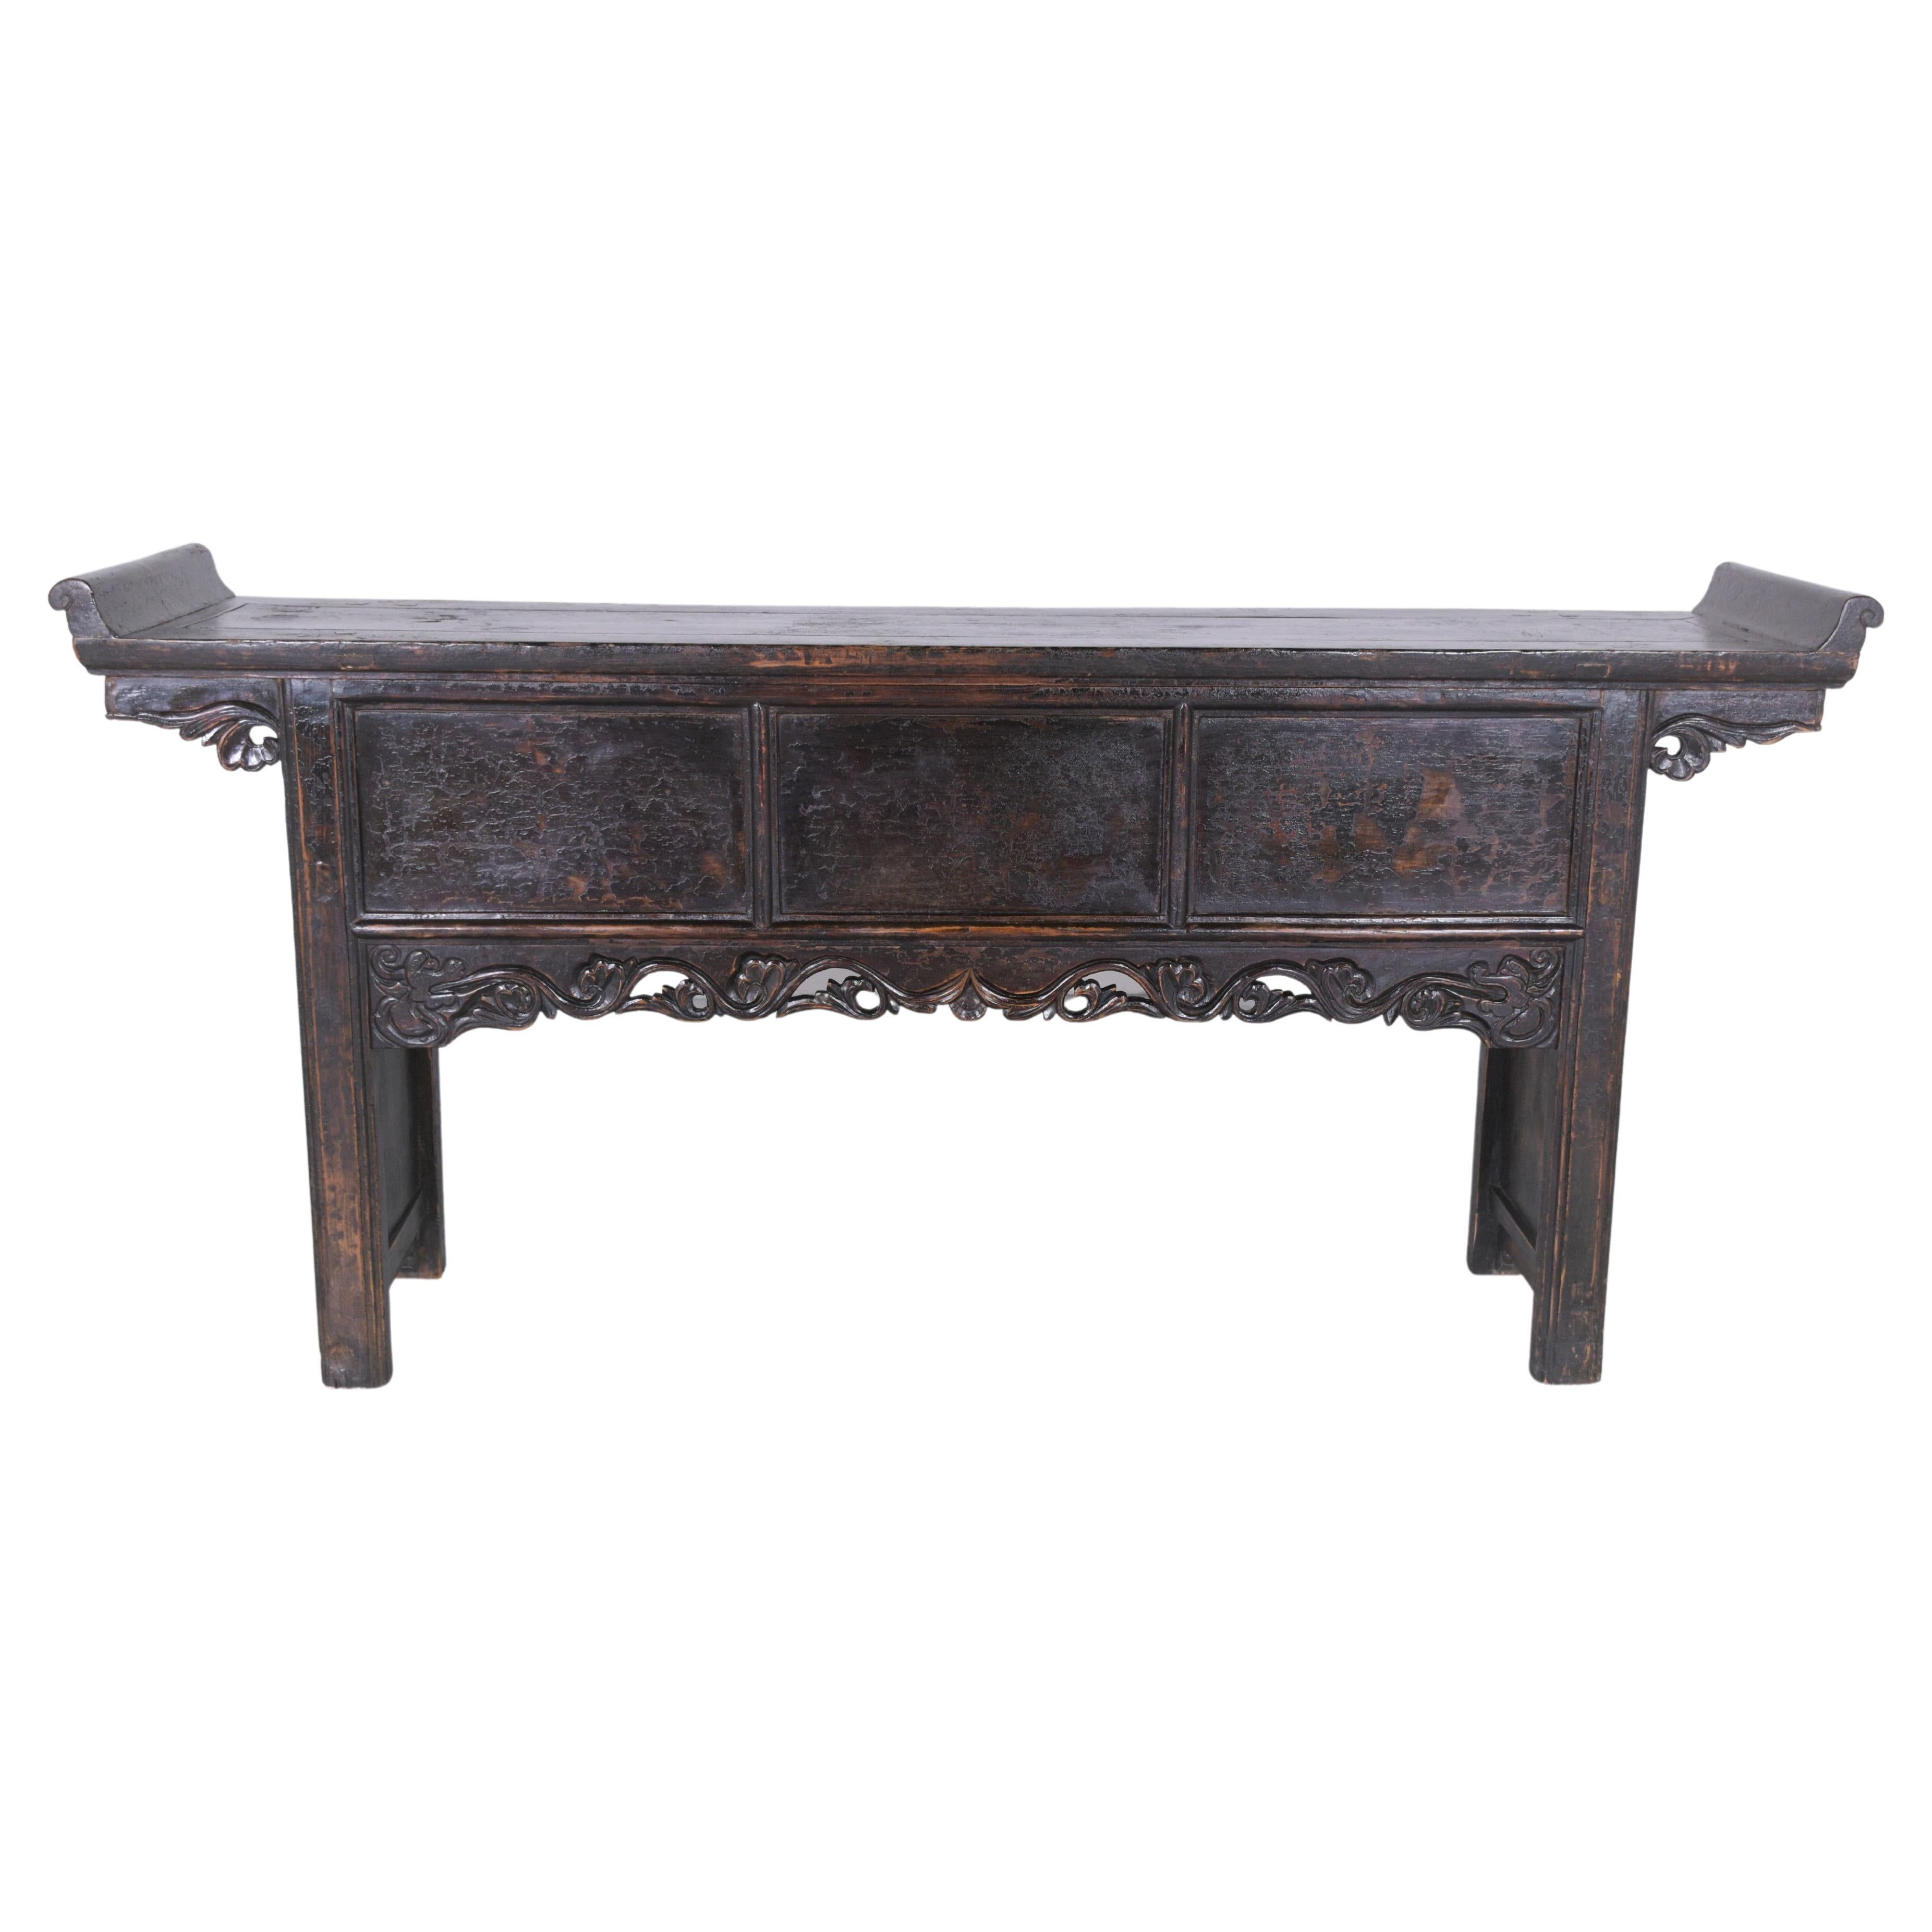 Embrace the rich heritage and exquisite craftsmanship of the early 20th century with our vintage Chinese altar console. This piece, hailing from the 1900s, has been thoughtfully restored, waxed, and polished by our team of professional craftsmen,